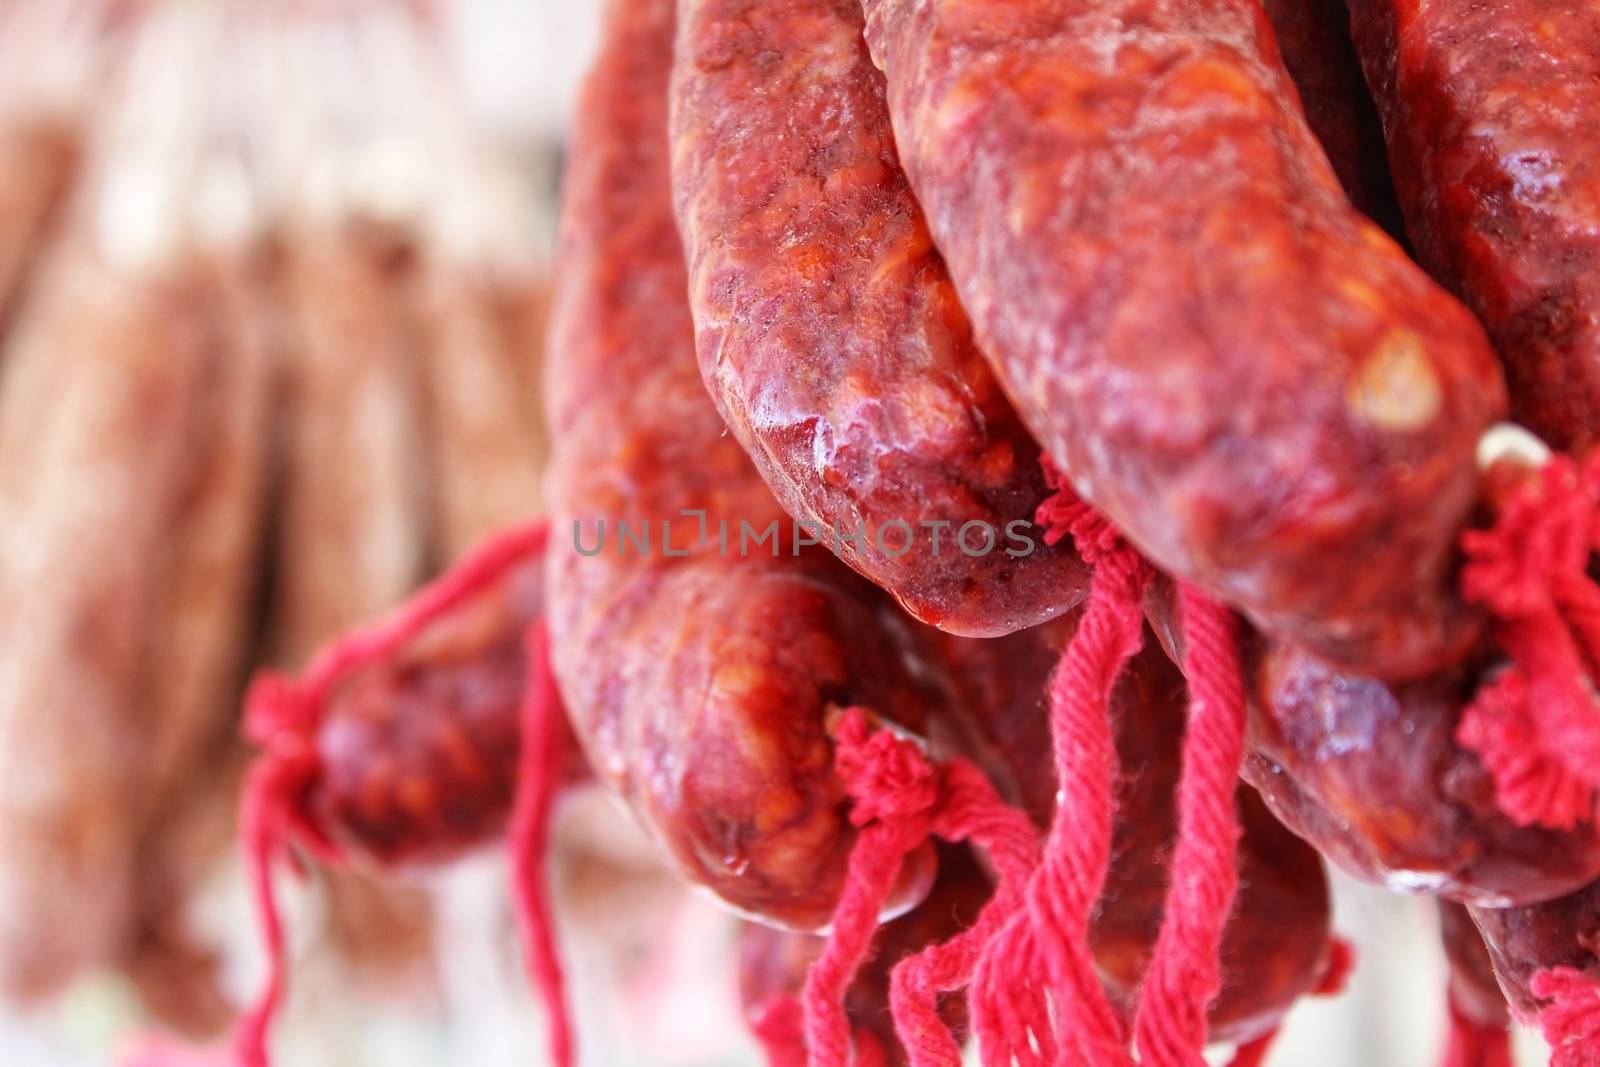 Spicy pork sausage for sale at a market stall by soniabonet